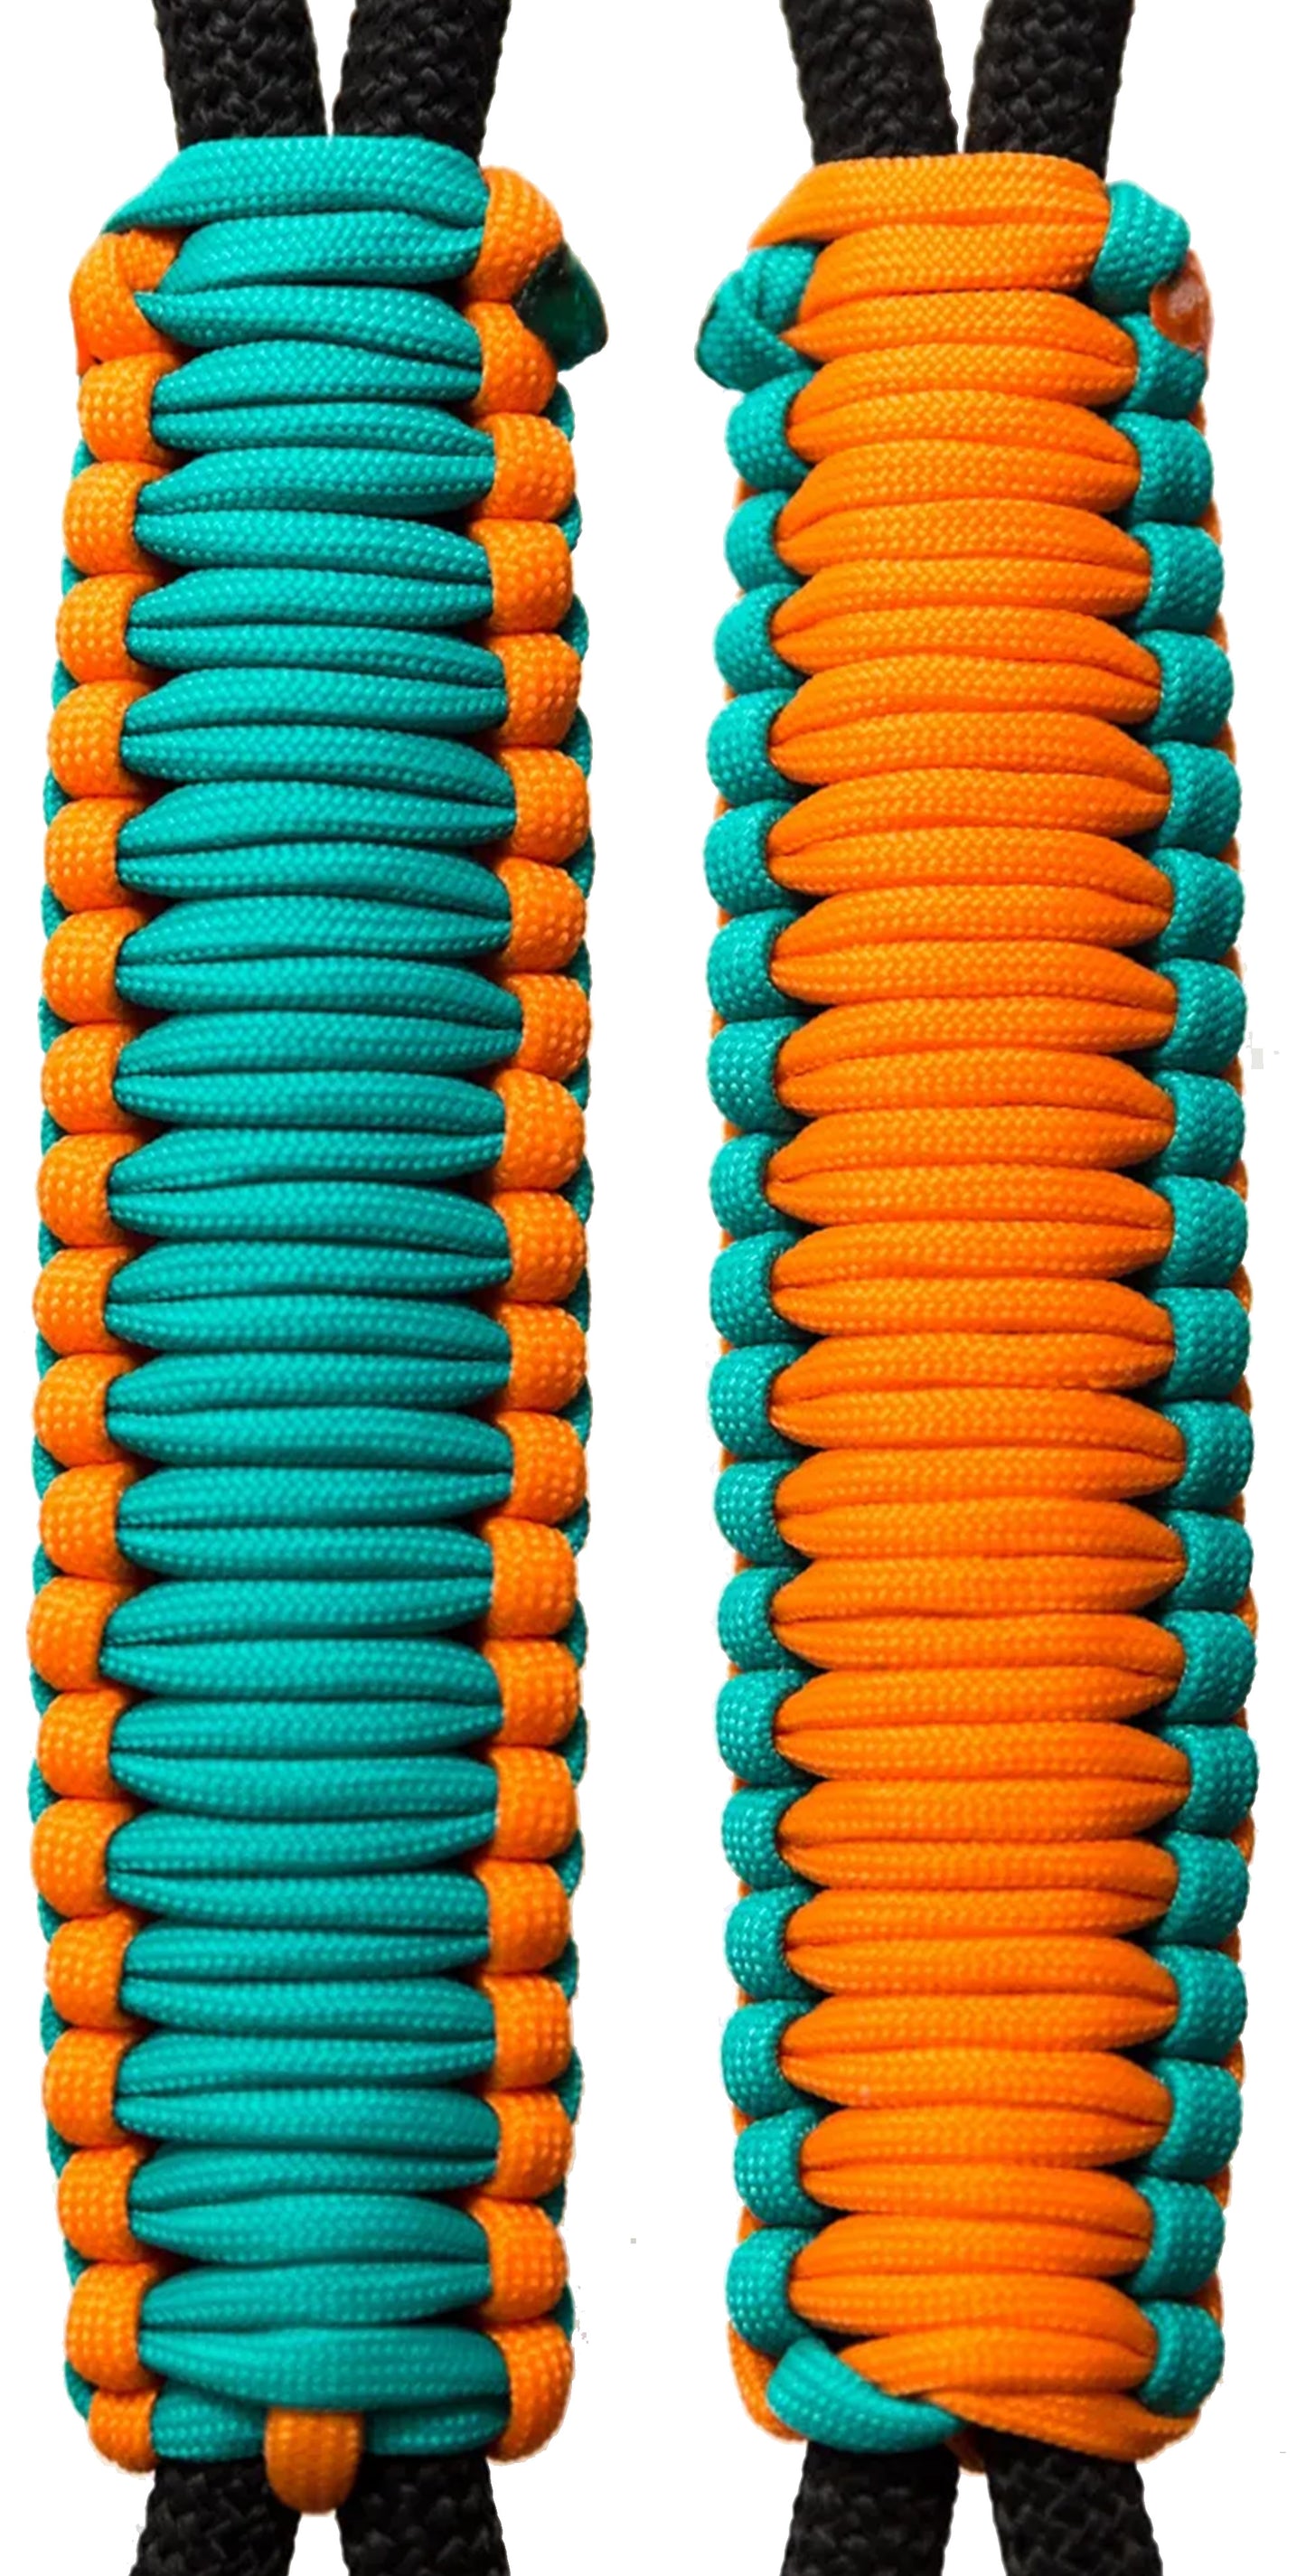 Teal & Neon Orange -C017C002 - Paracord Handmade Handles for Stainless Steel Tumblers - Made in USA!